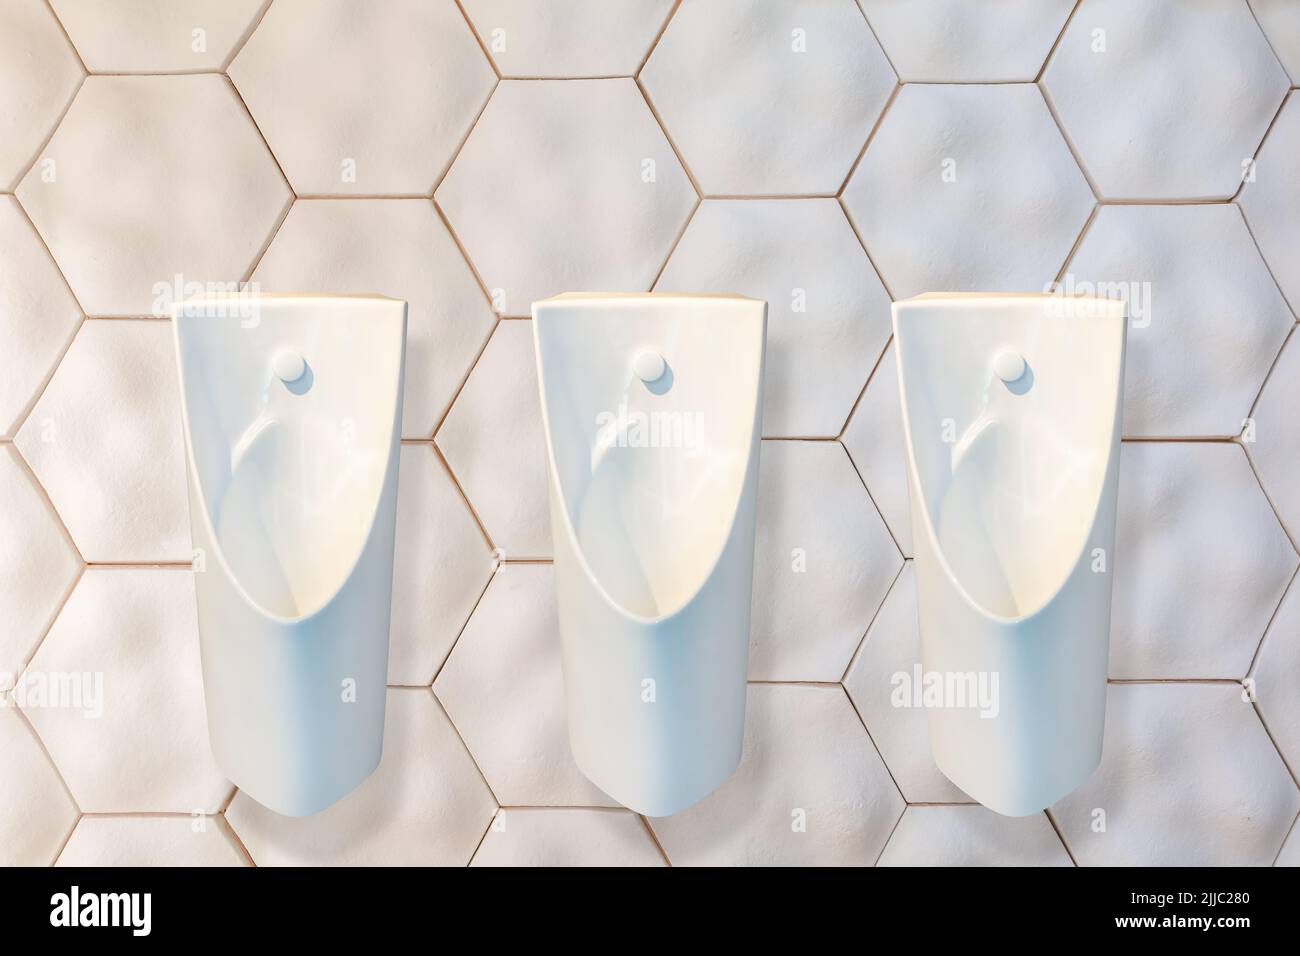 Row of three new design urinals attached to an ecological wall made of recycled natural material Stock Photo